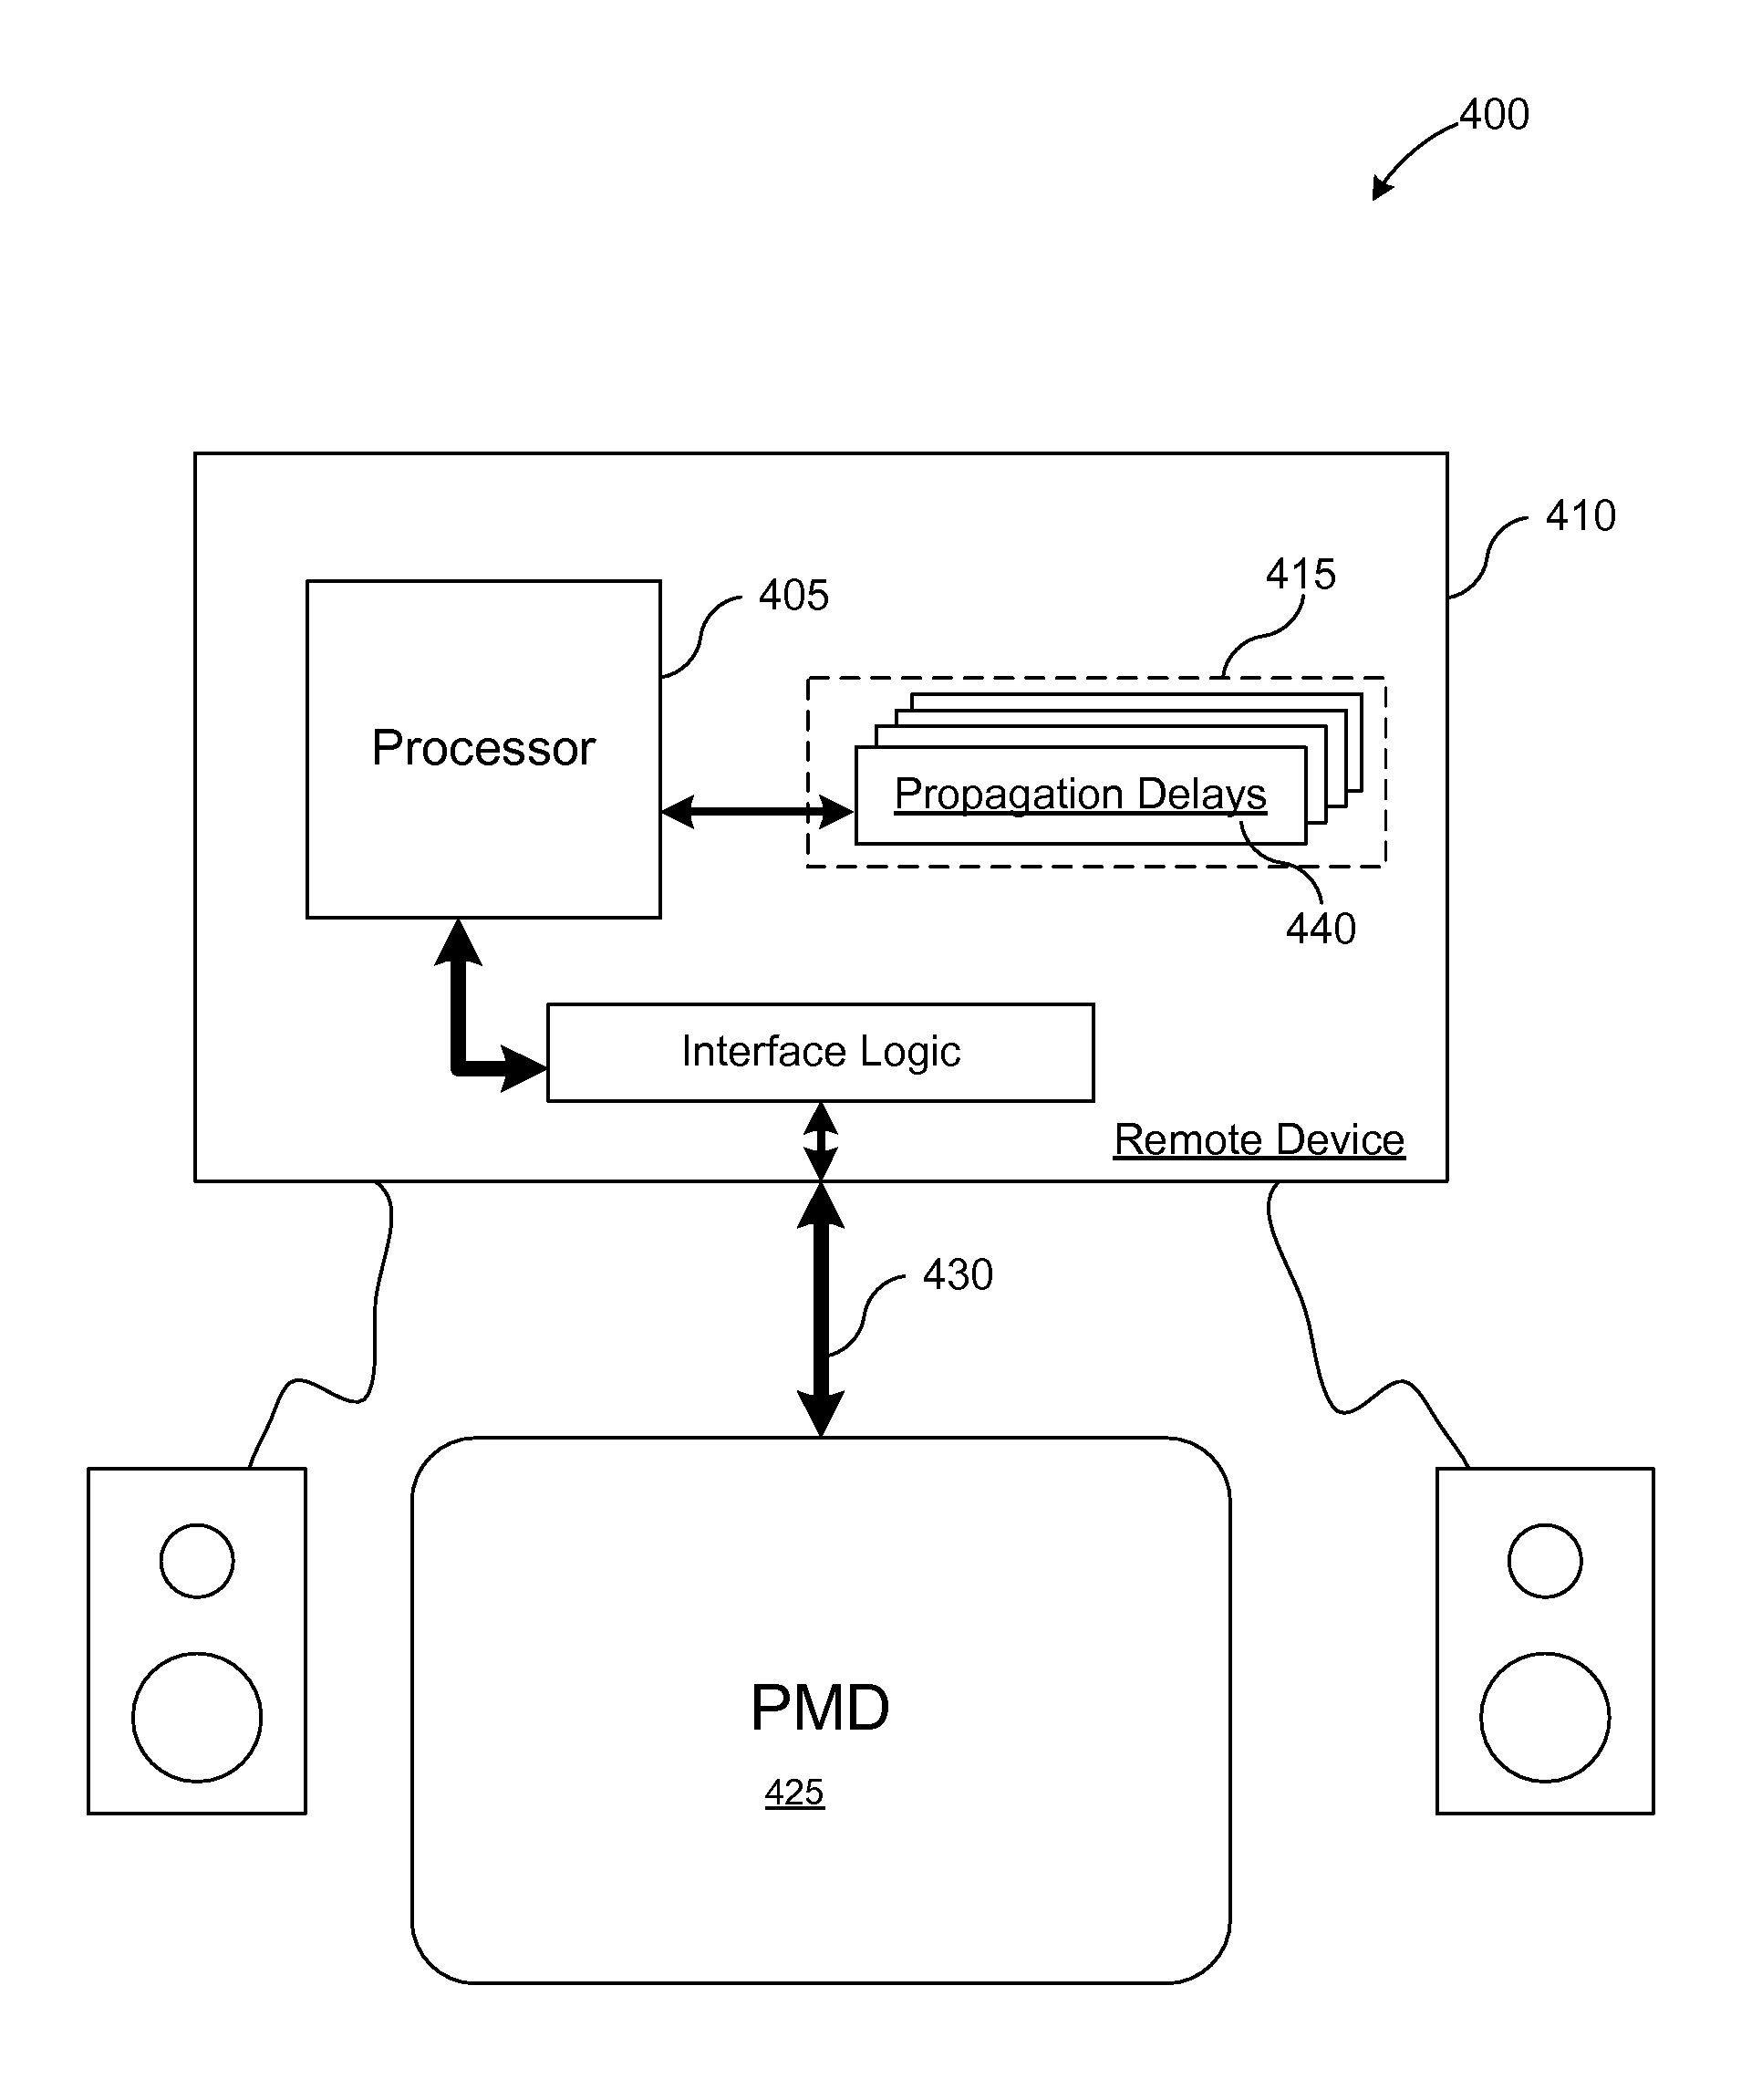 Synchronizing digital audio and analog video from a portable media device